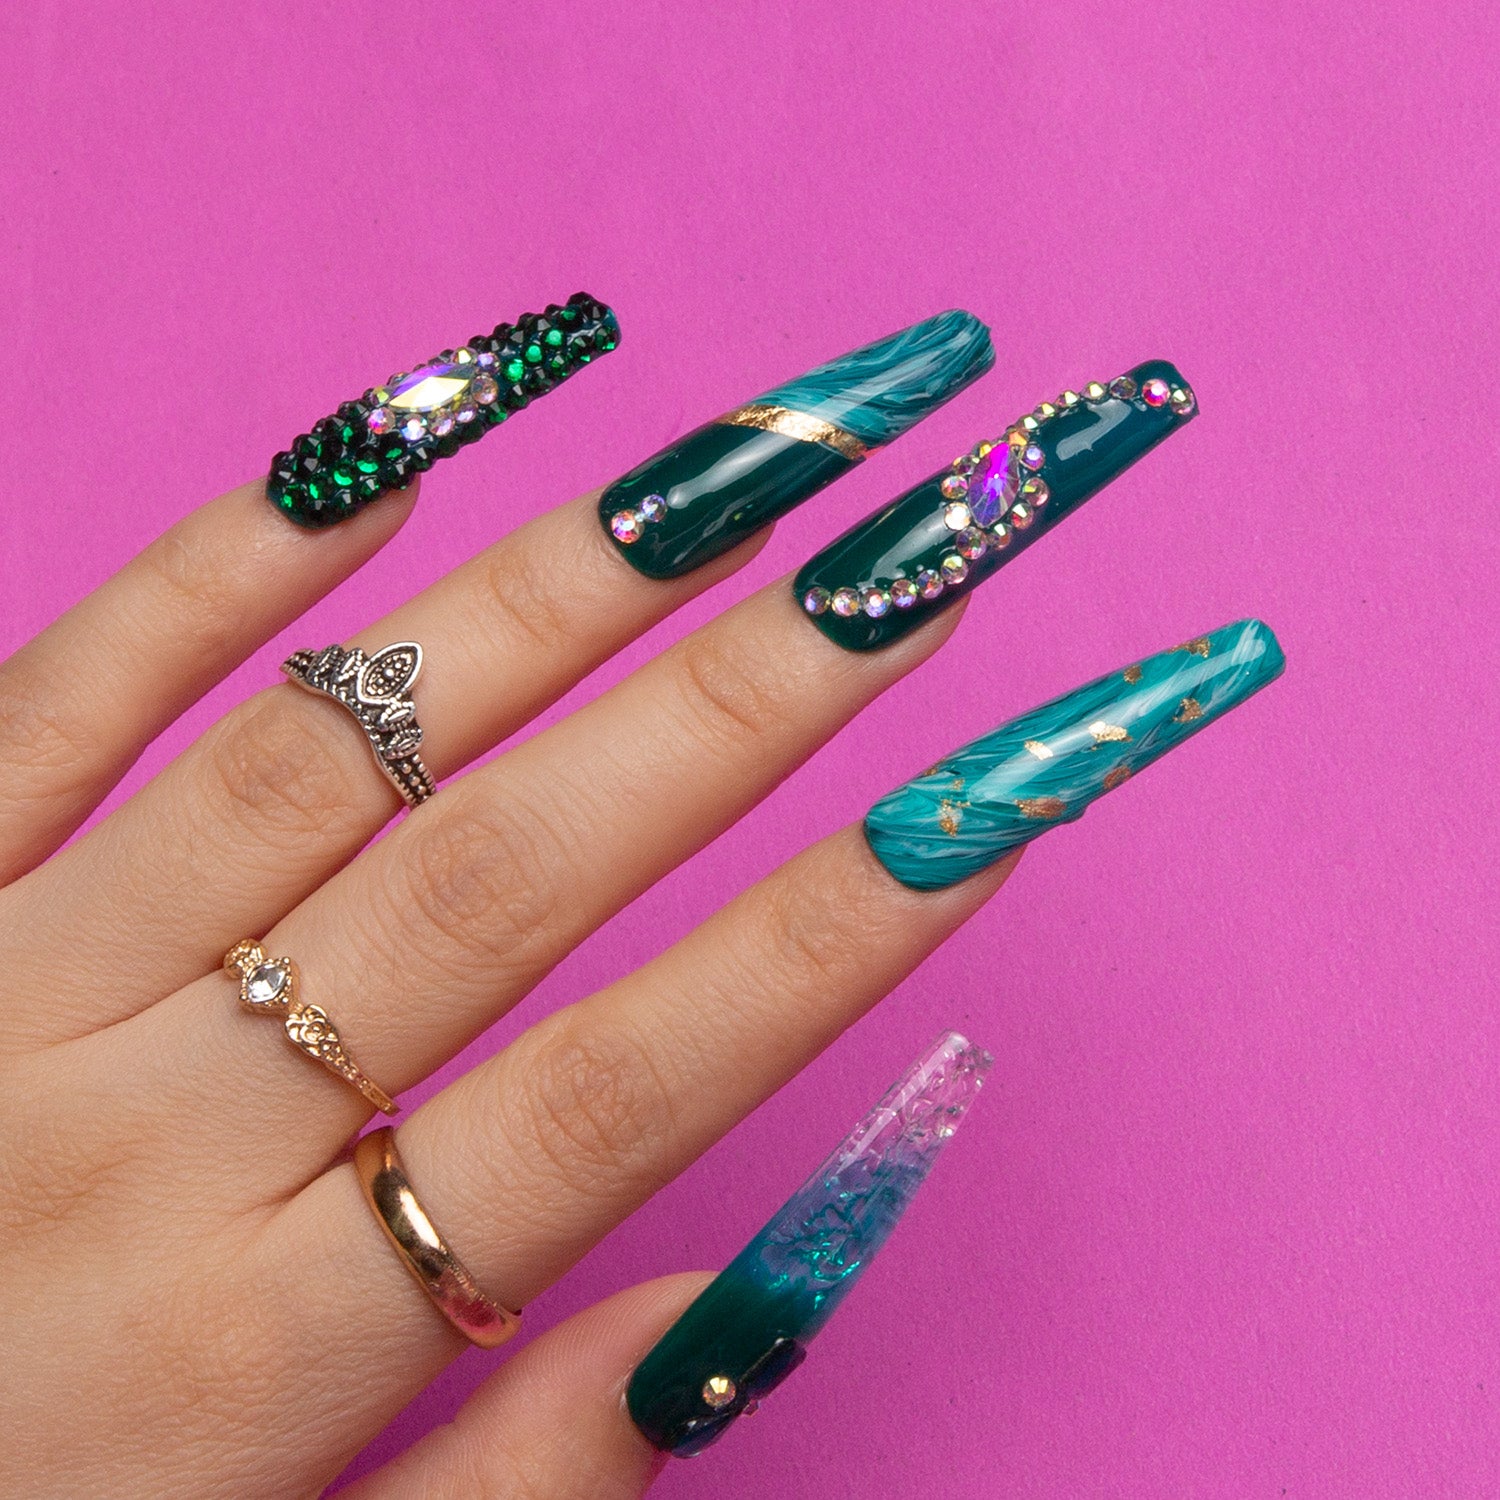 Hand wearing Emerald Envy coffin-shaped press-on nails decorated with intricate gold accents, green shades, and gemstones evoking a lush woodland aesthetic against a pink background.